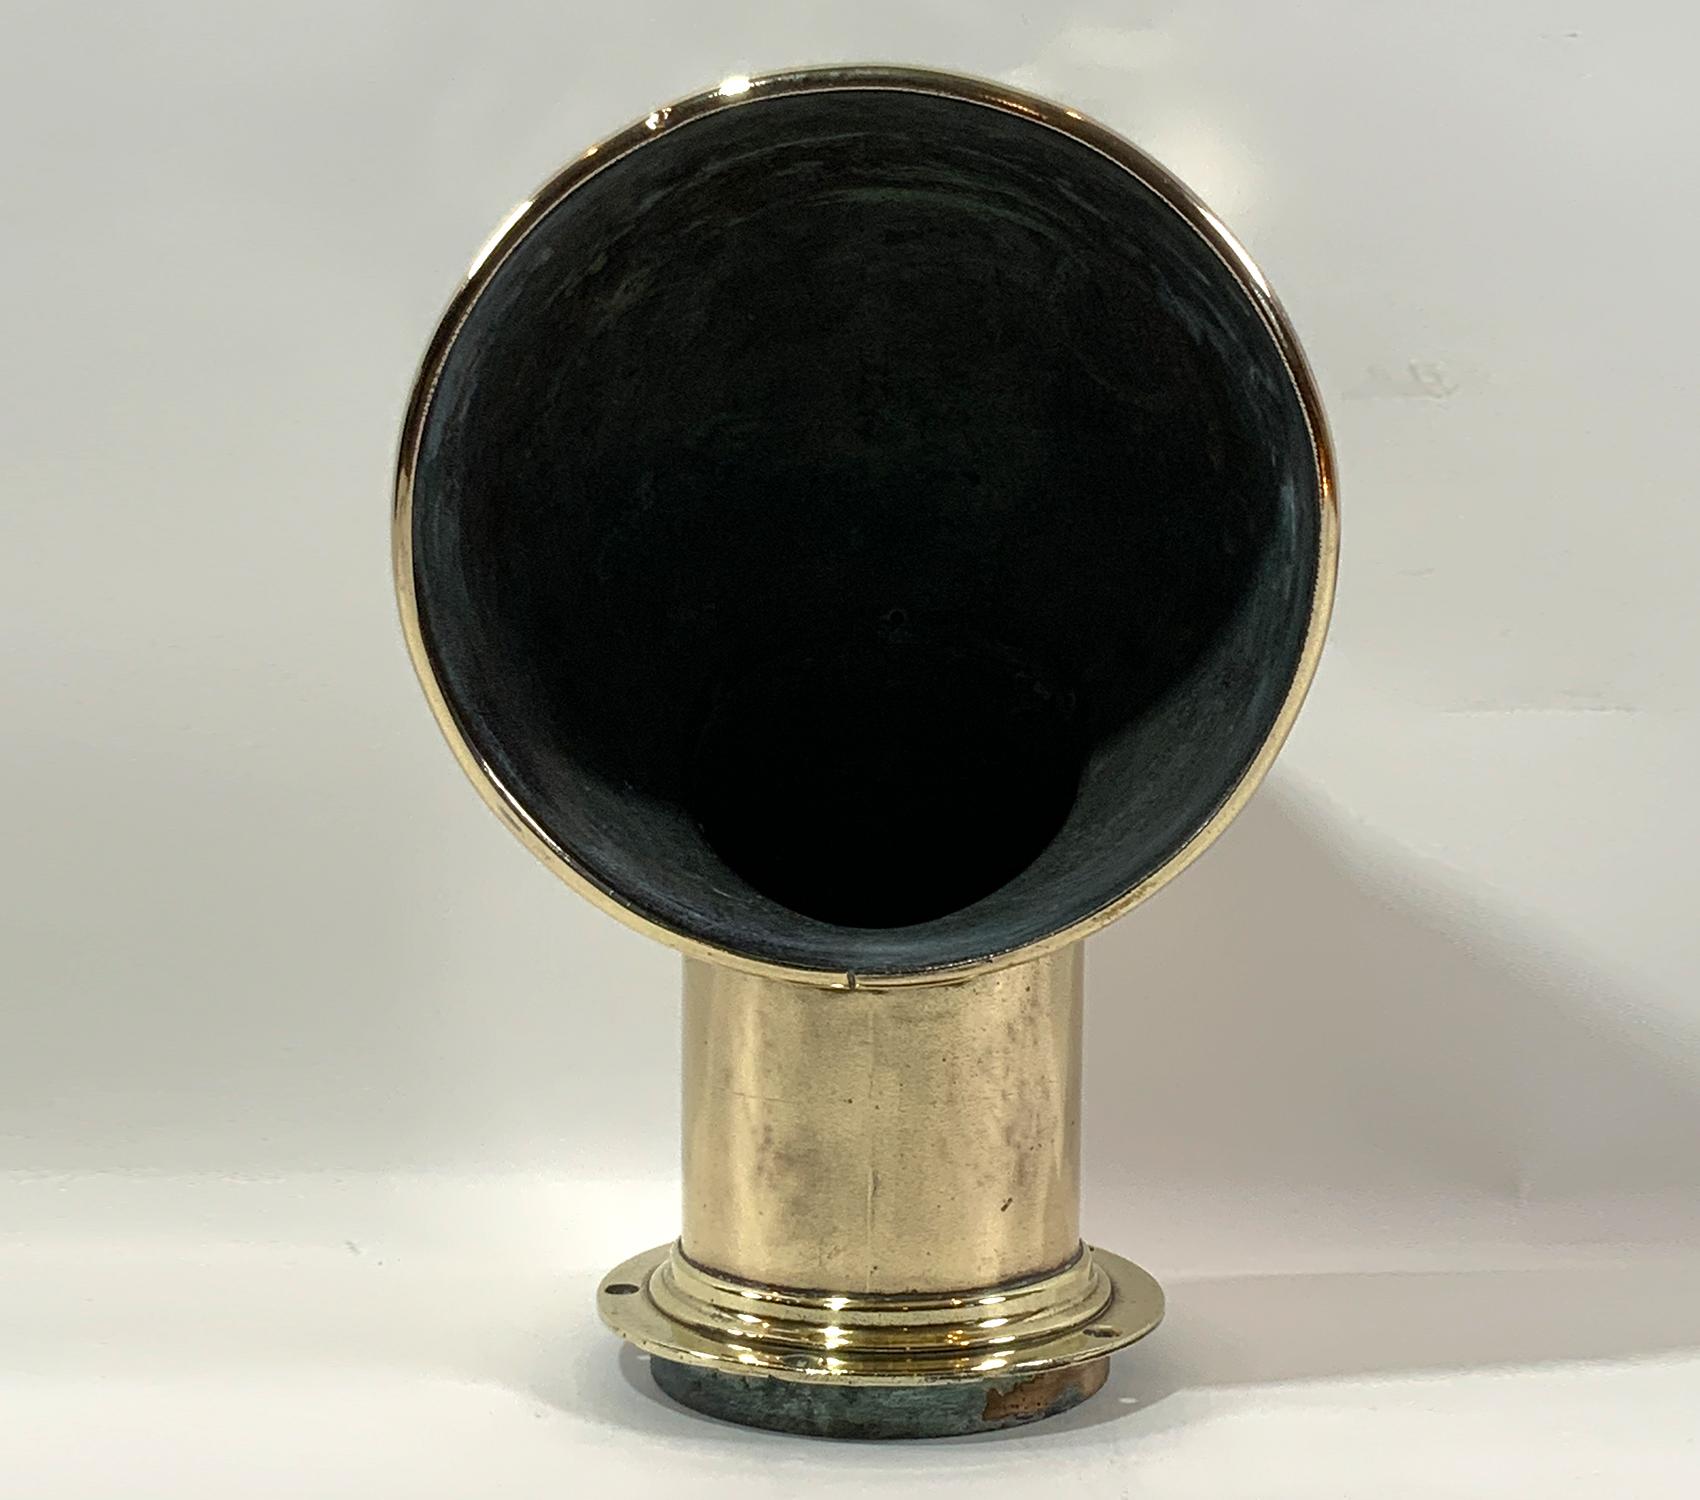 Solid brass Perko air vent. Highly polished ventilator cowl from a boat. Nine inch diameter vent opening. Base is six inch diameter. Twelve inches tall with base flange pierced for four bolts. Circa 1940.